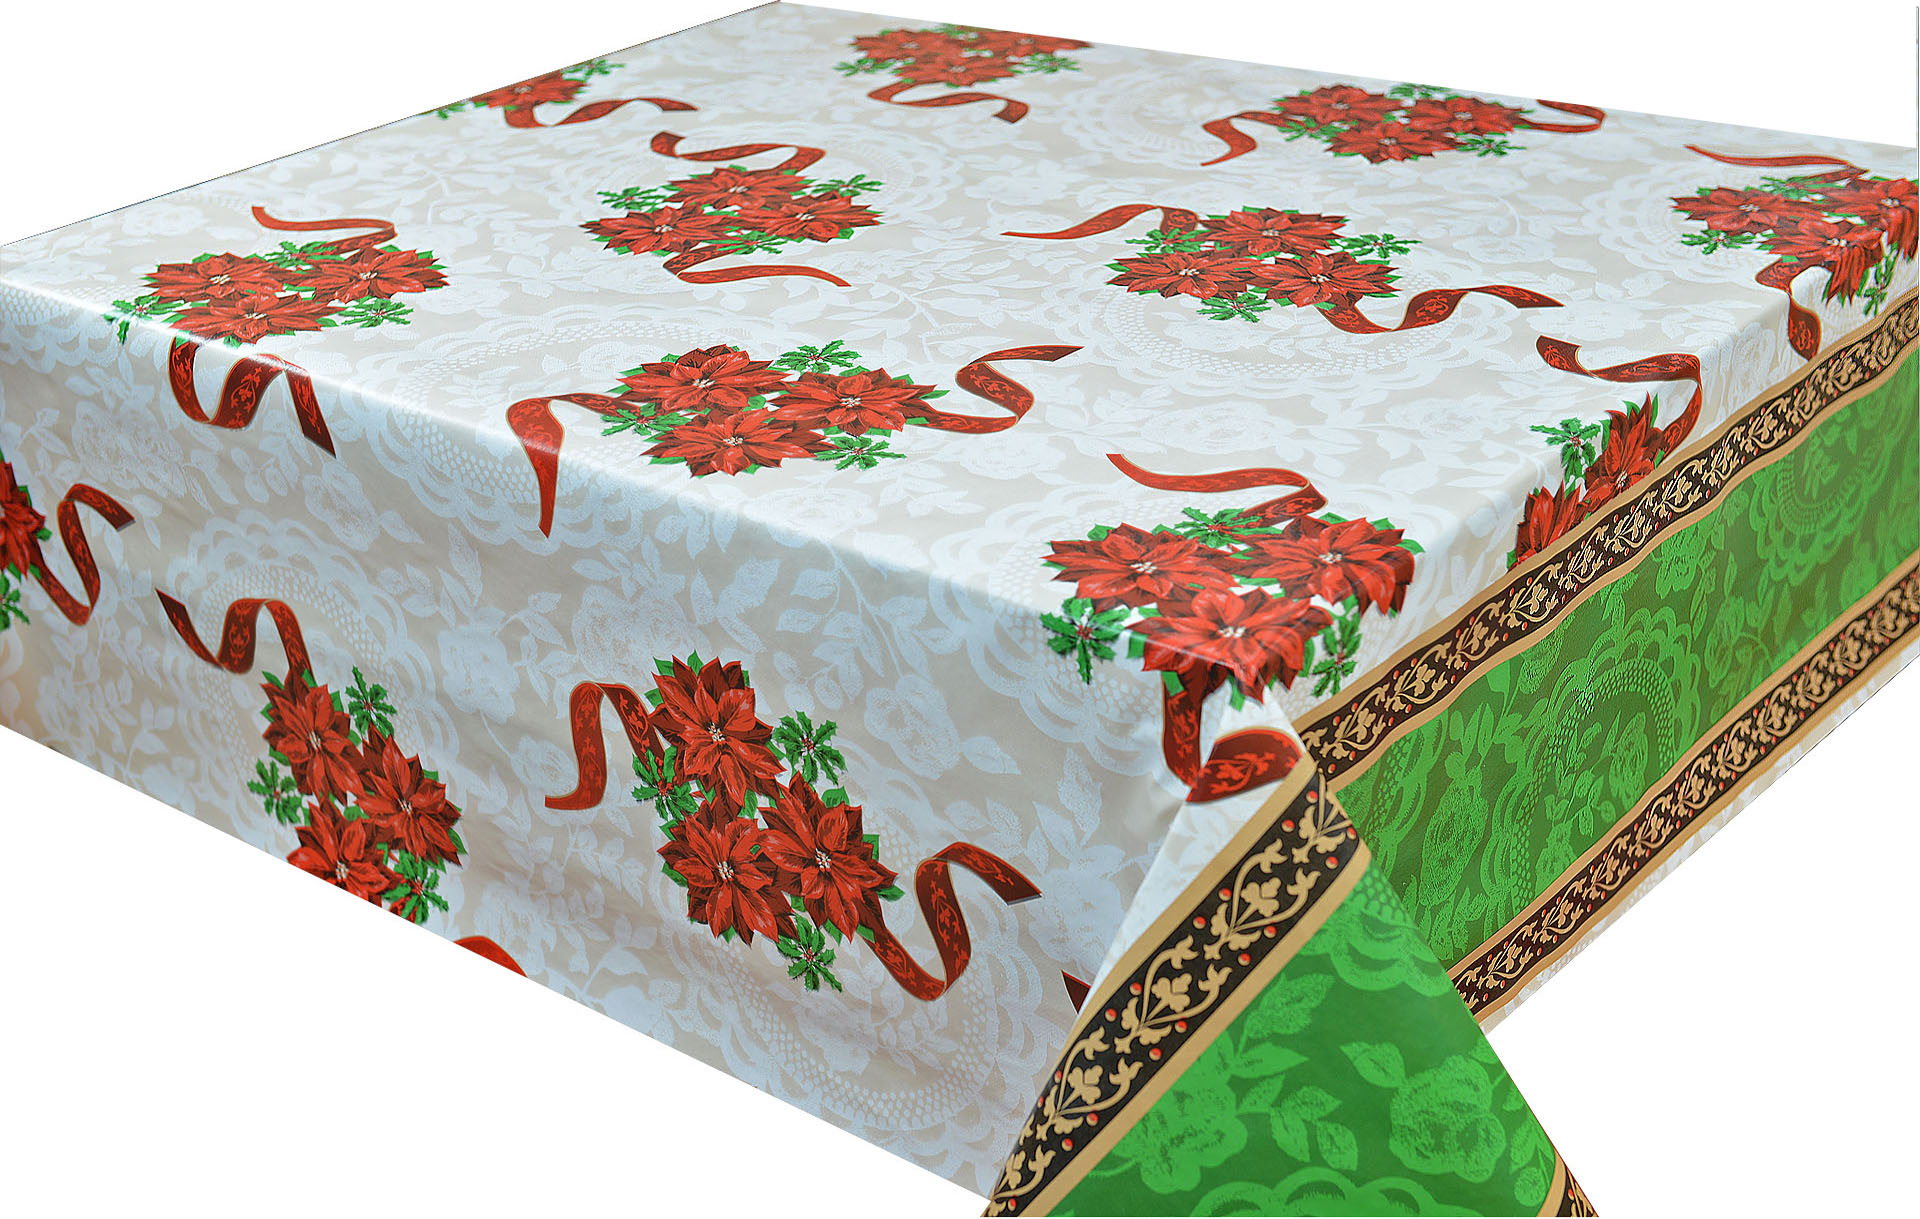 Table Cover - Printed Table Cover - Europe Design Table Cover - BS-M8247